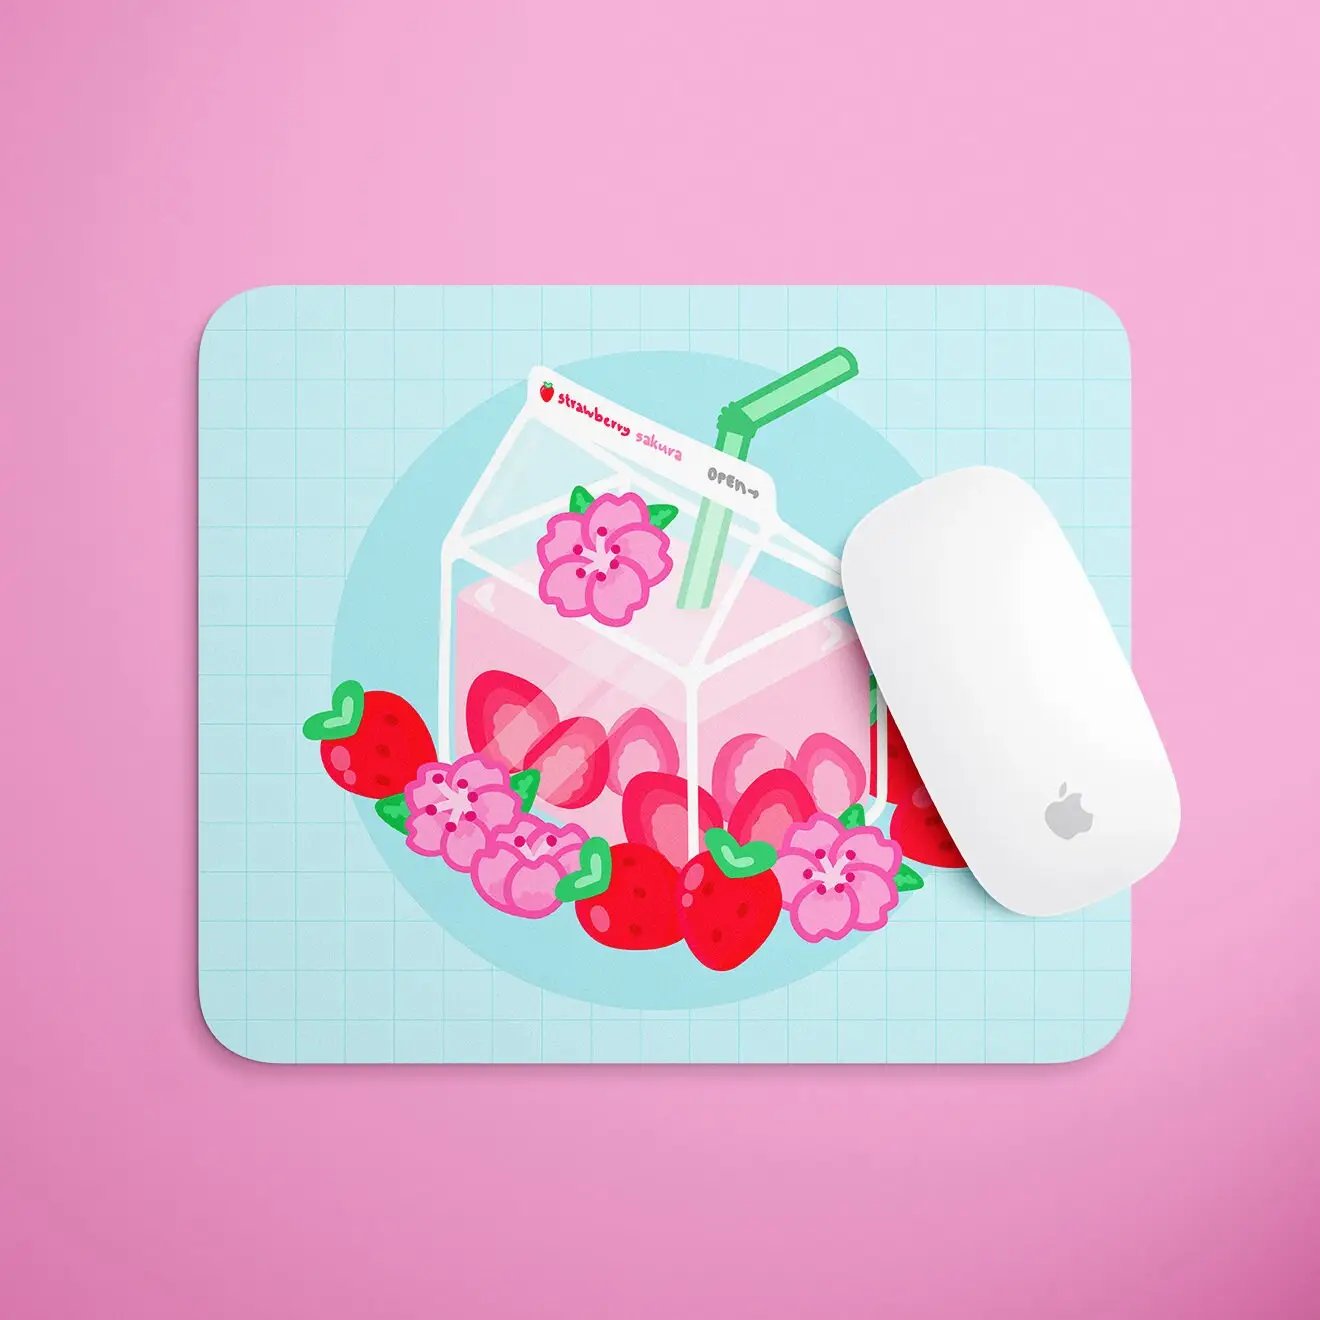 a mouse pad with a strawberry milkshake and strawberries on it